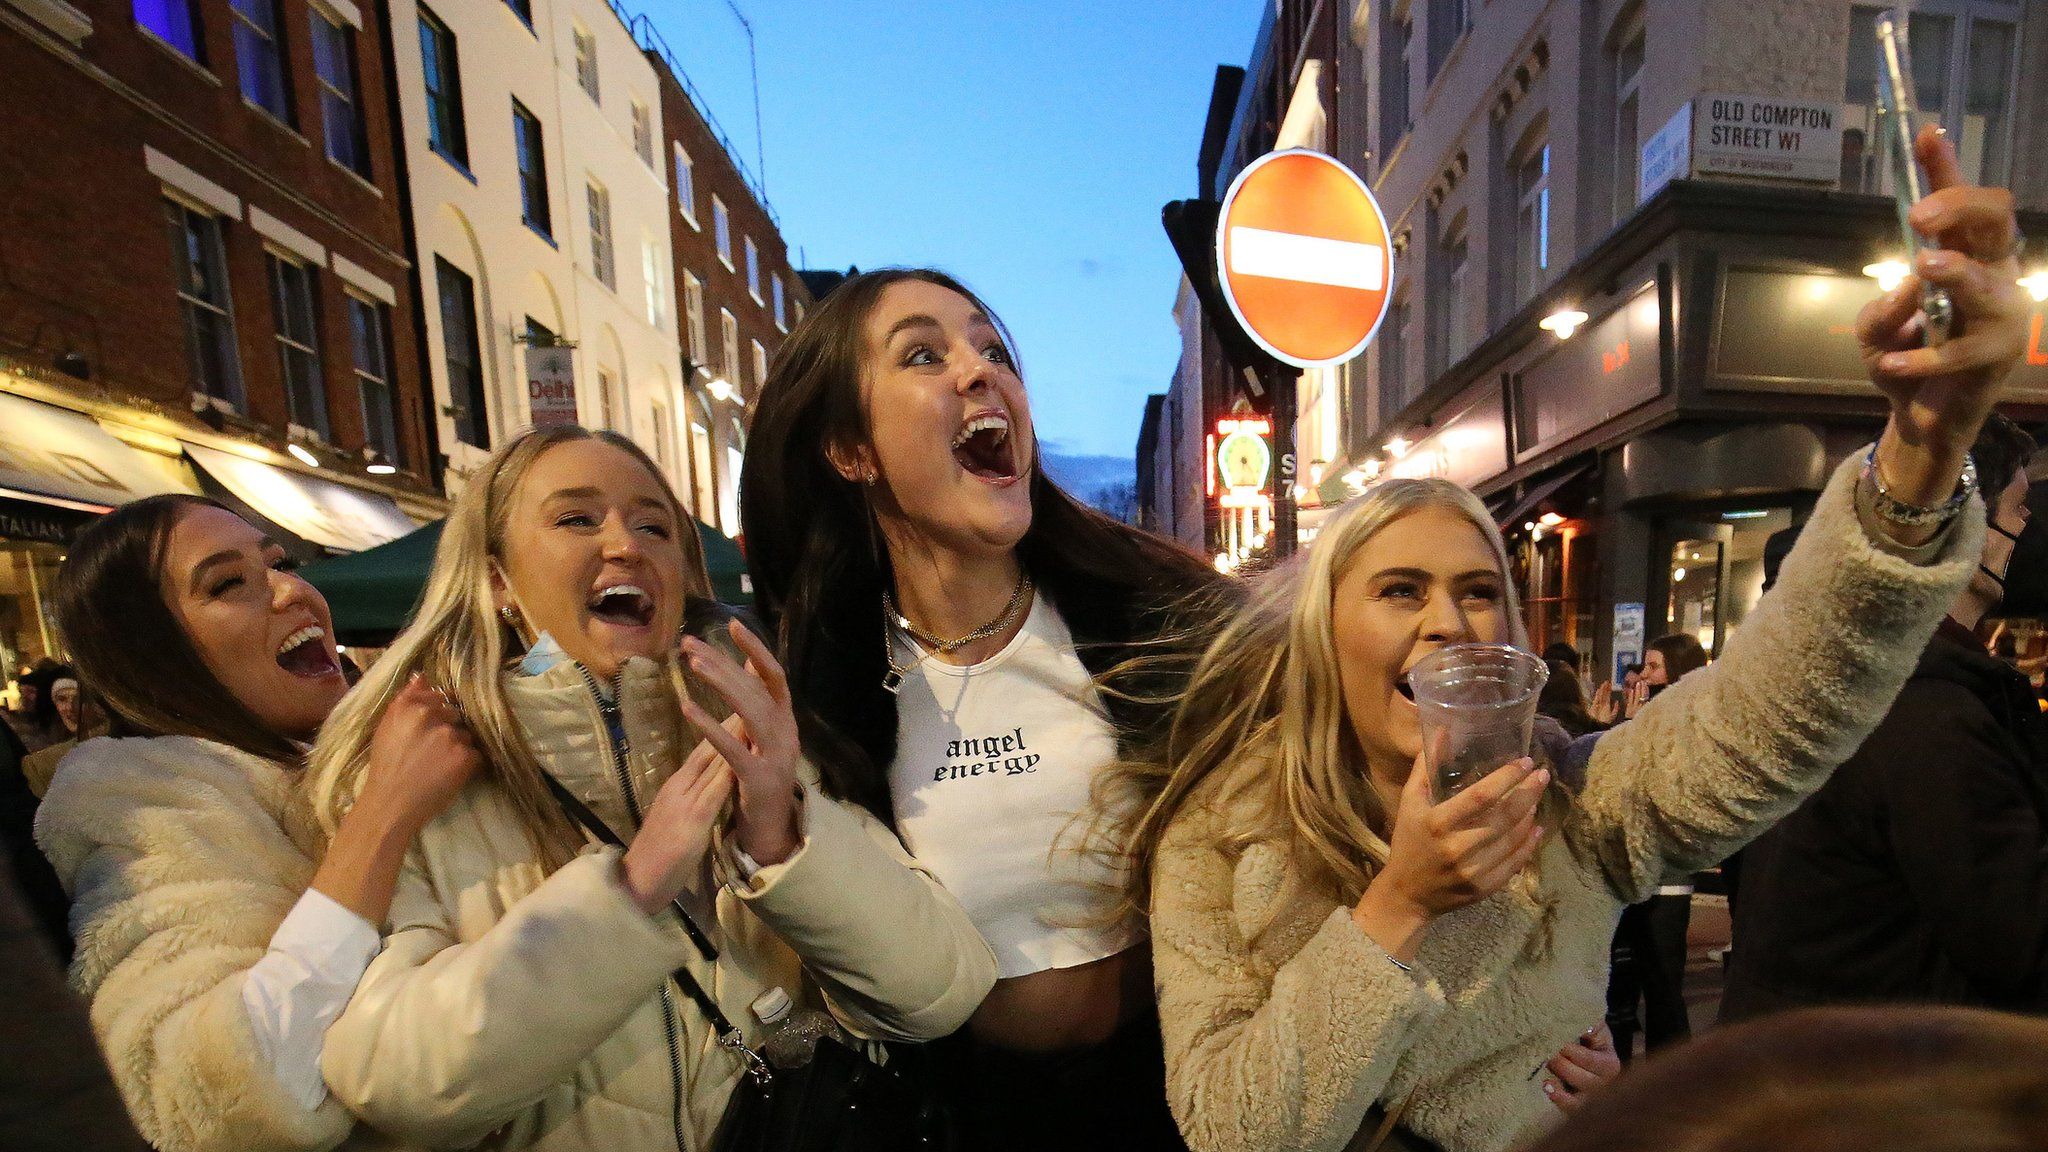 A girls' night out in Soho as lockdown restrictions are eased